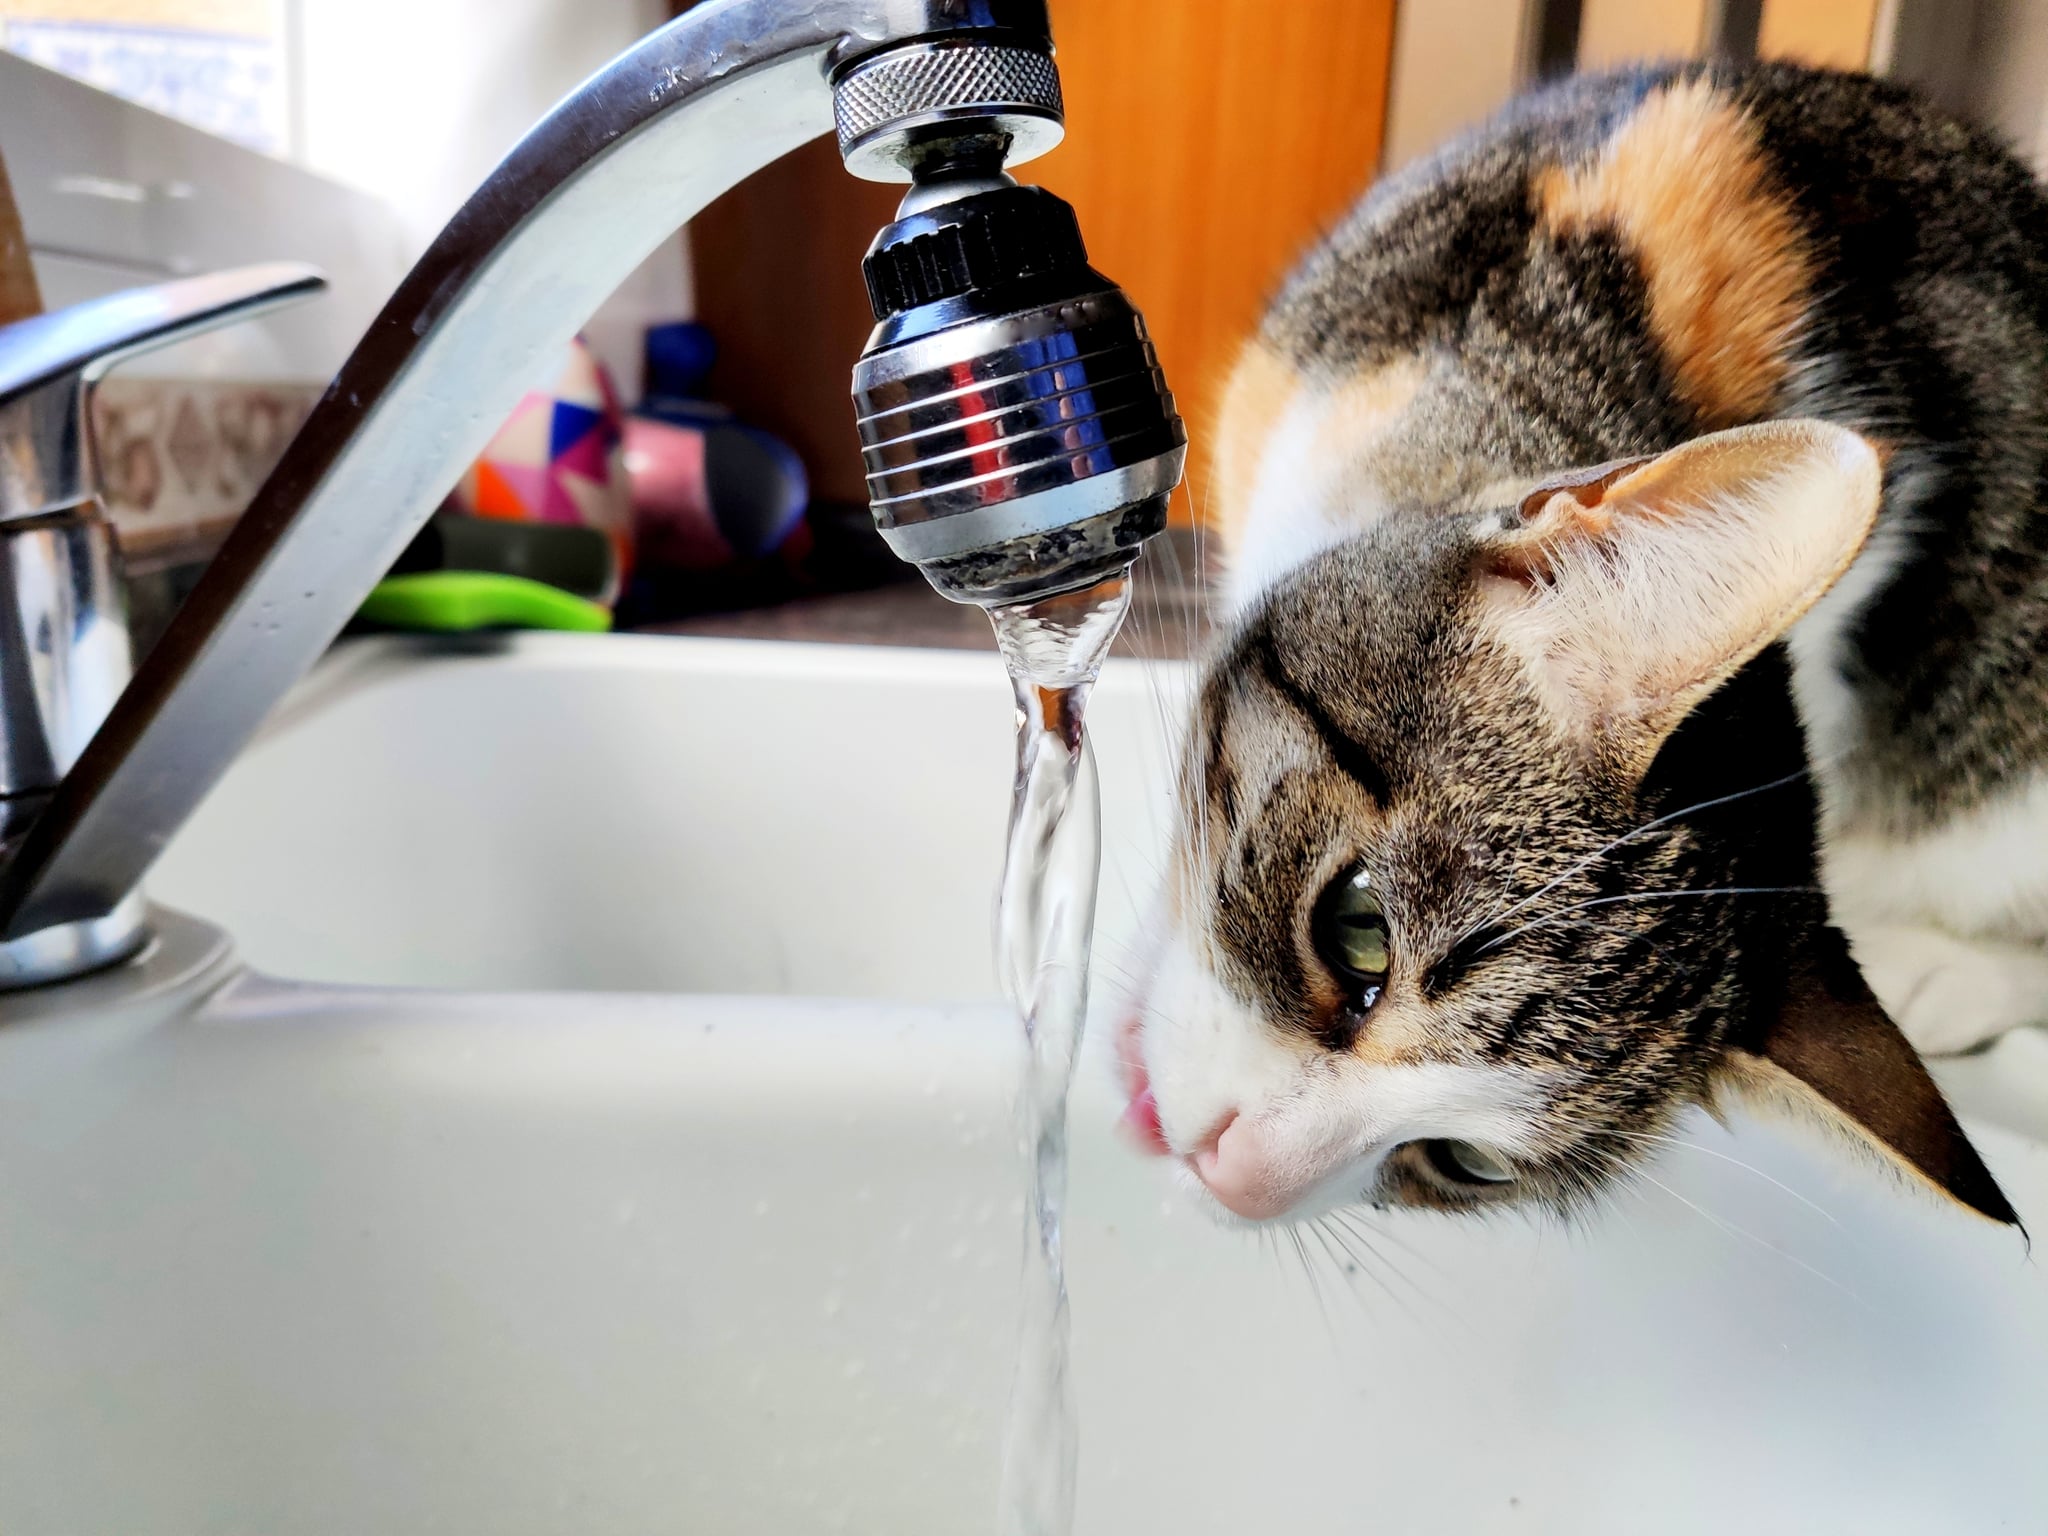 Why are cats picky about water?